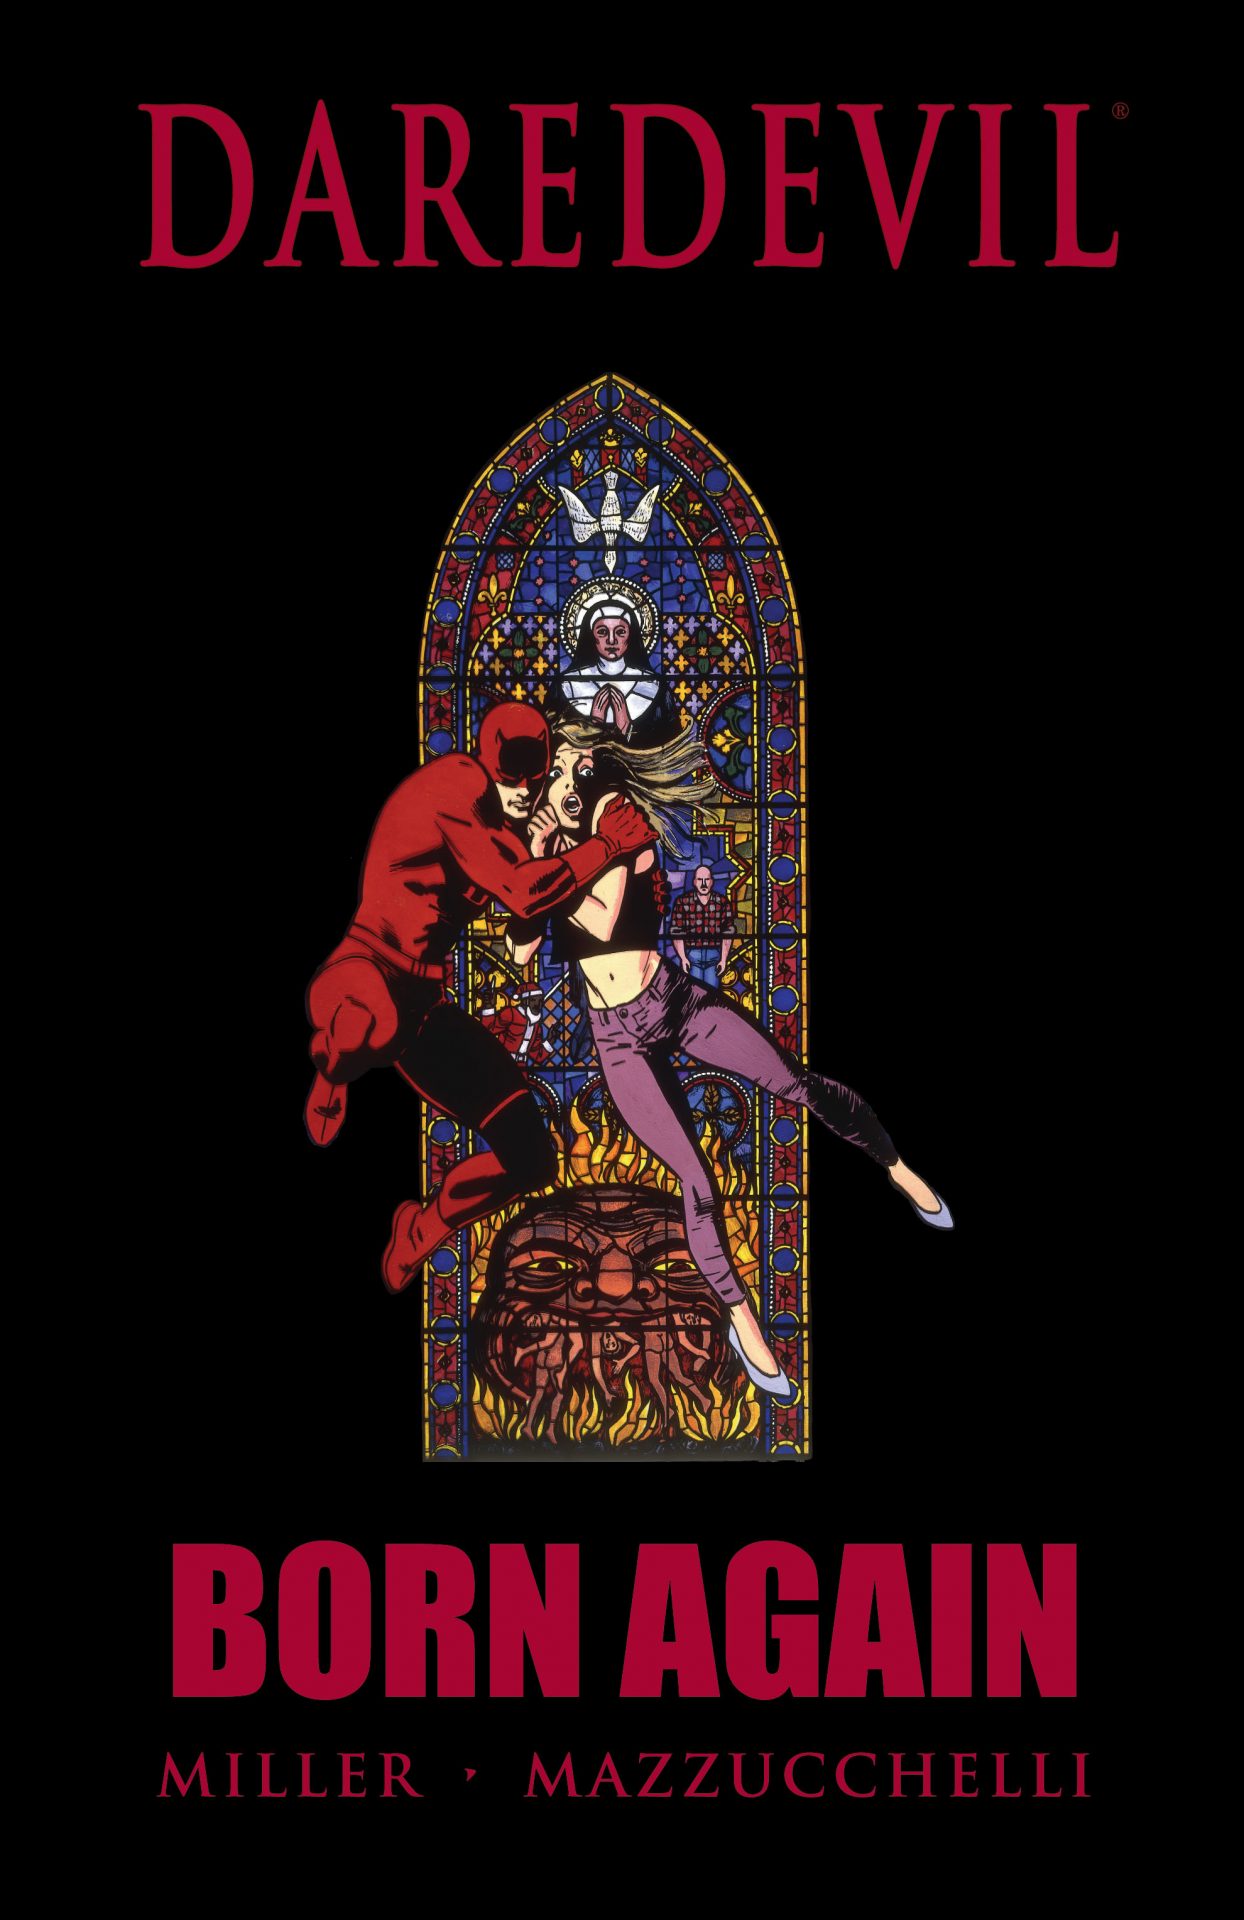 The cover for Daredevil Born Again shows Daredevil swinging in front of a stained glass window with Karen Page